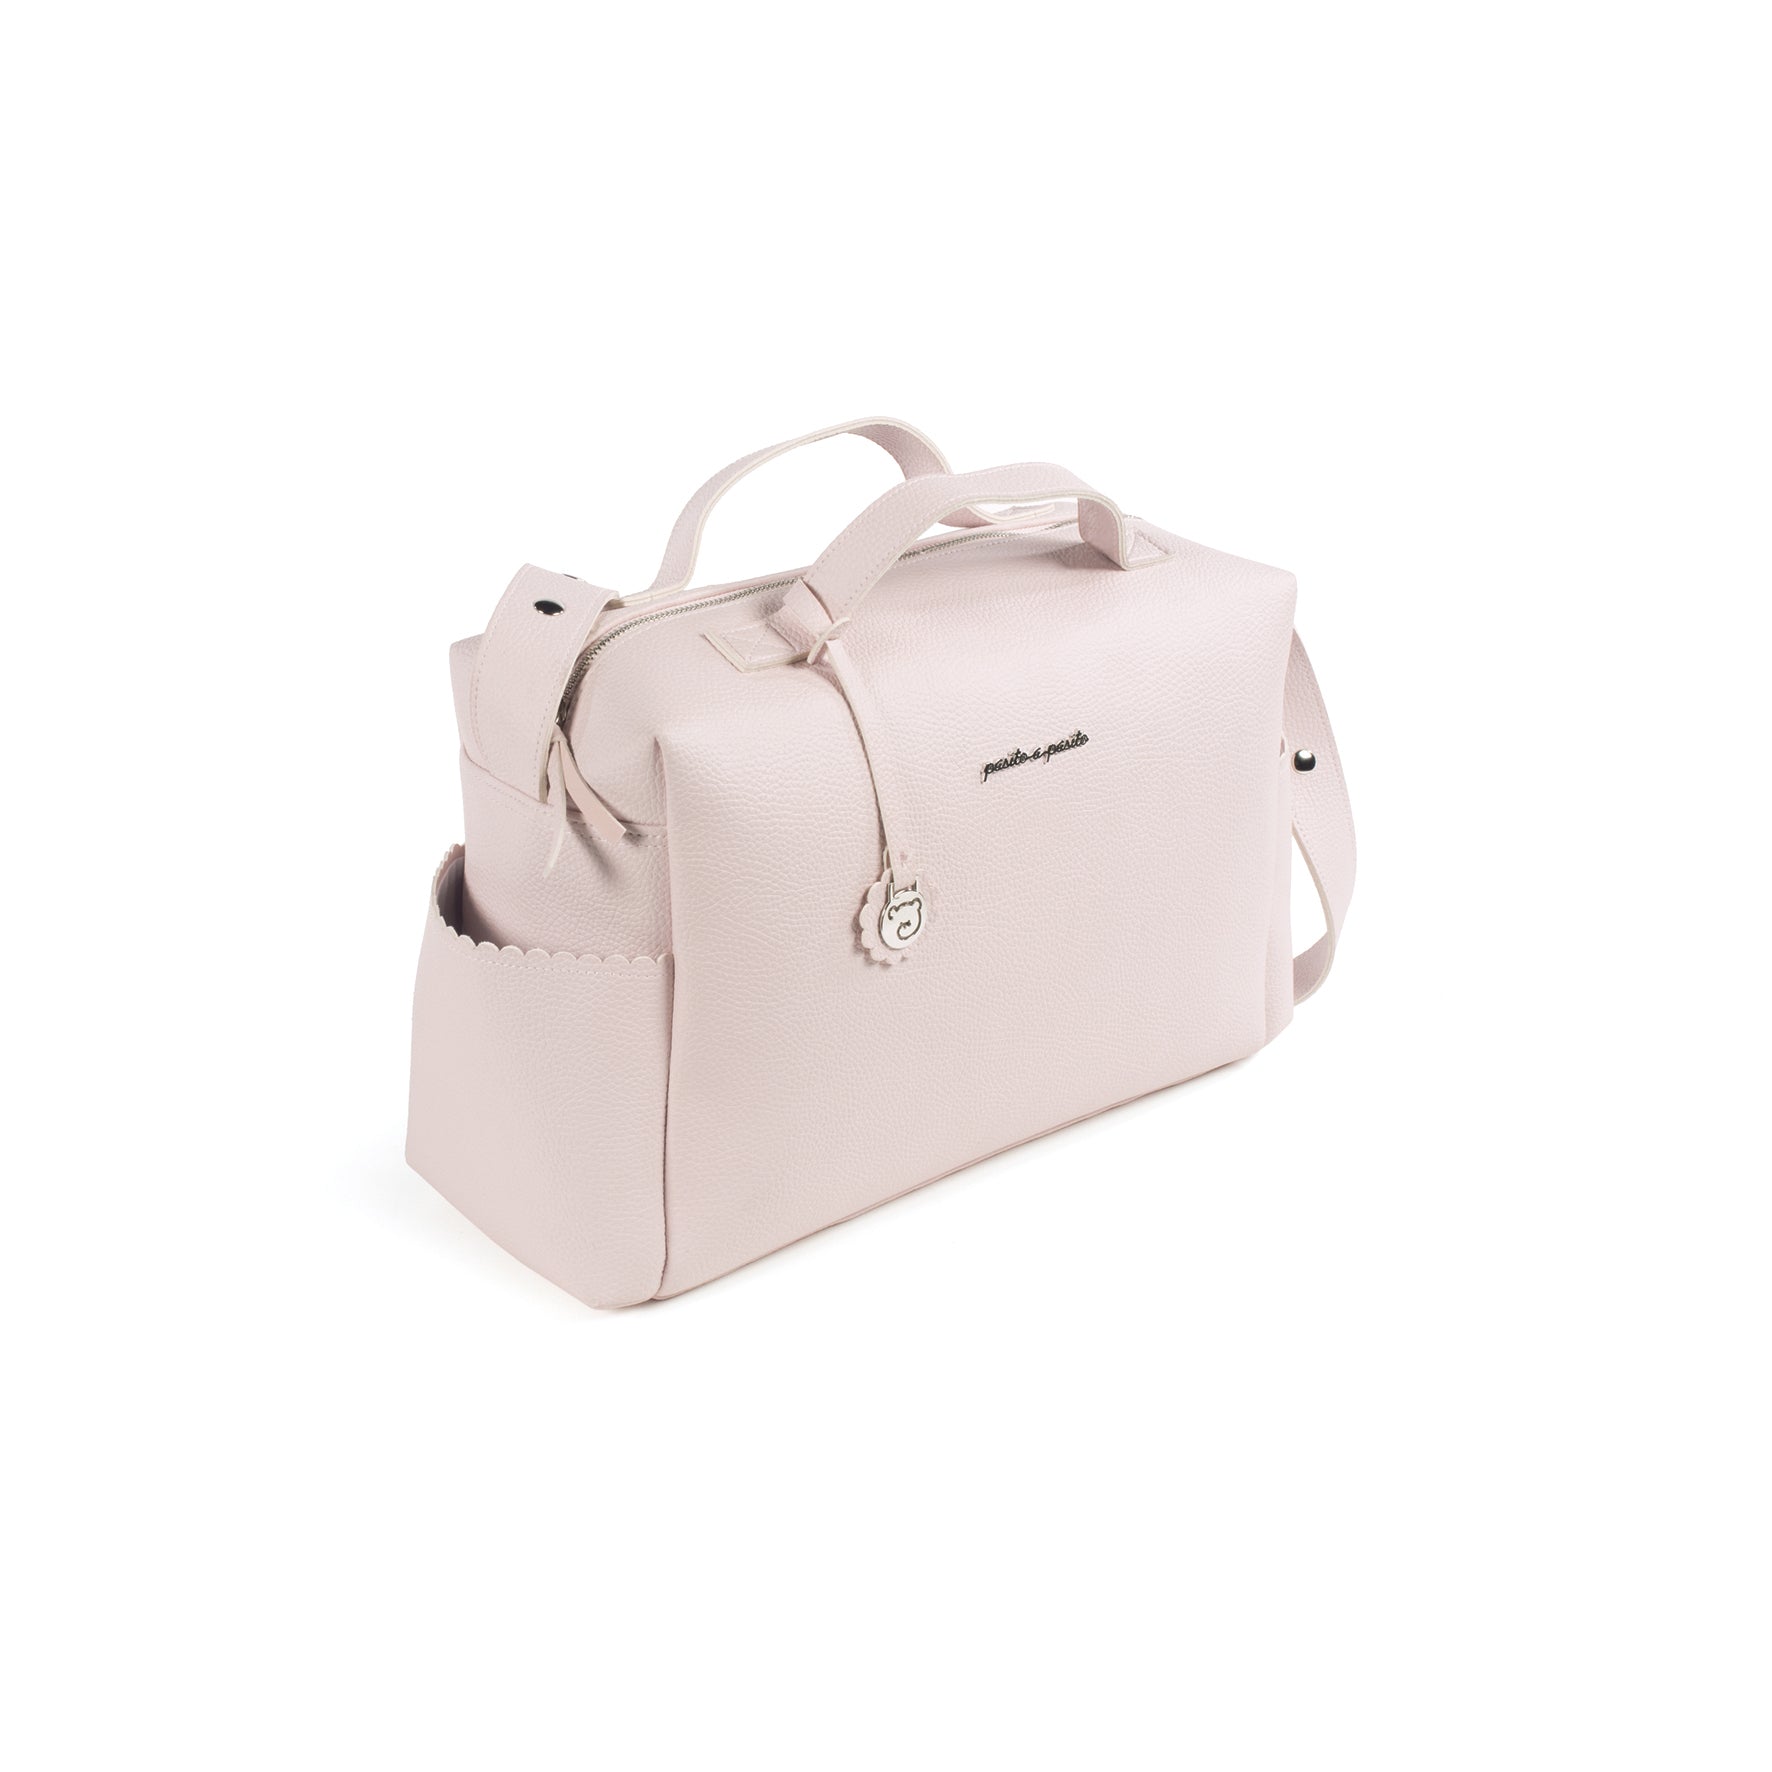 Pasito a Pasito Biscuit Pink Diaper Changing Bag